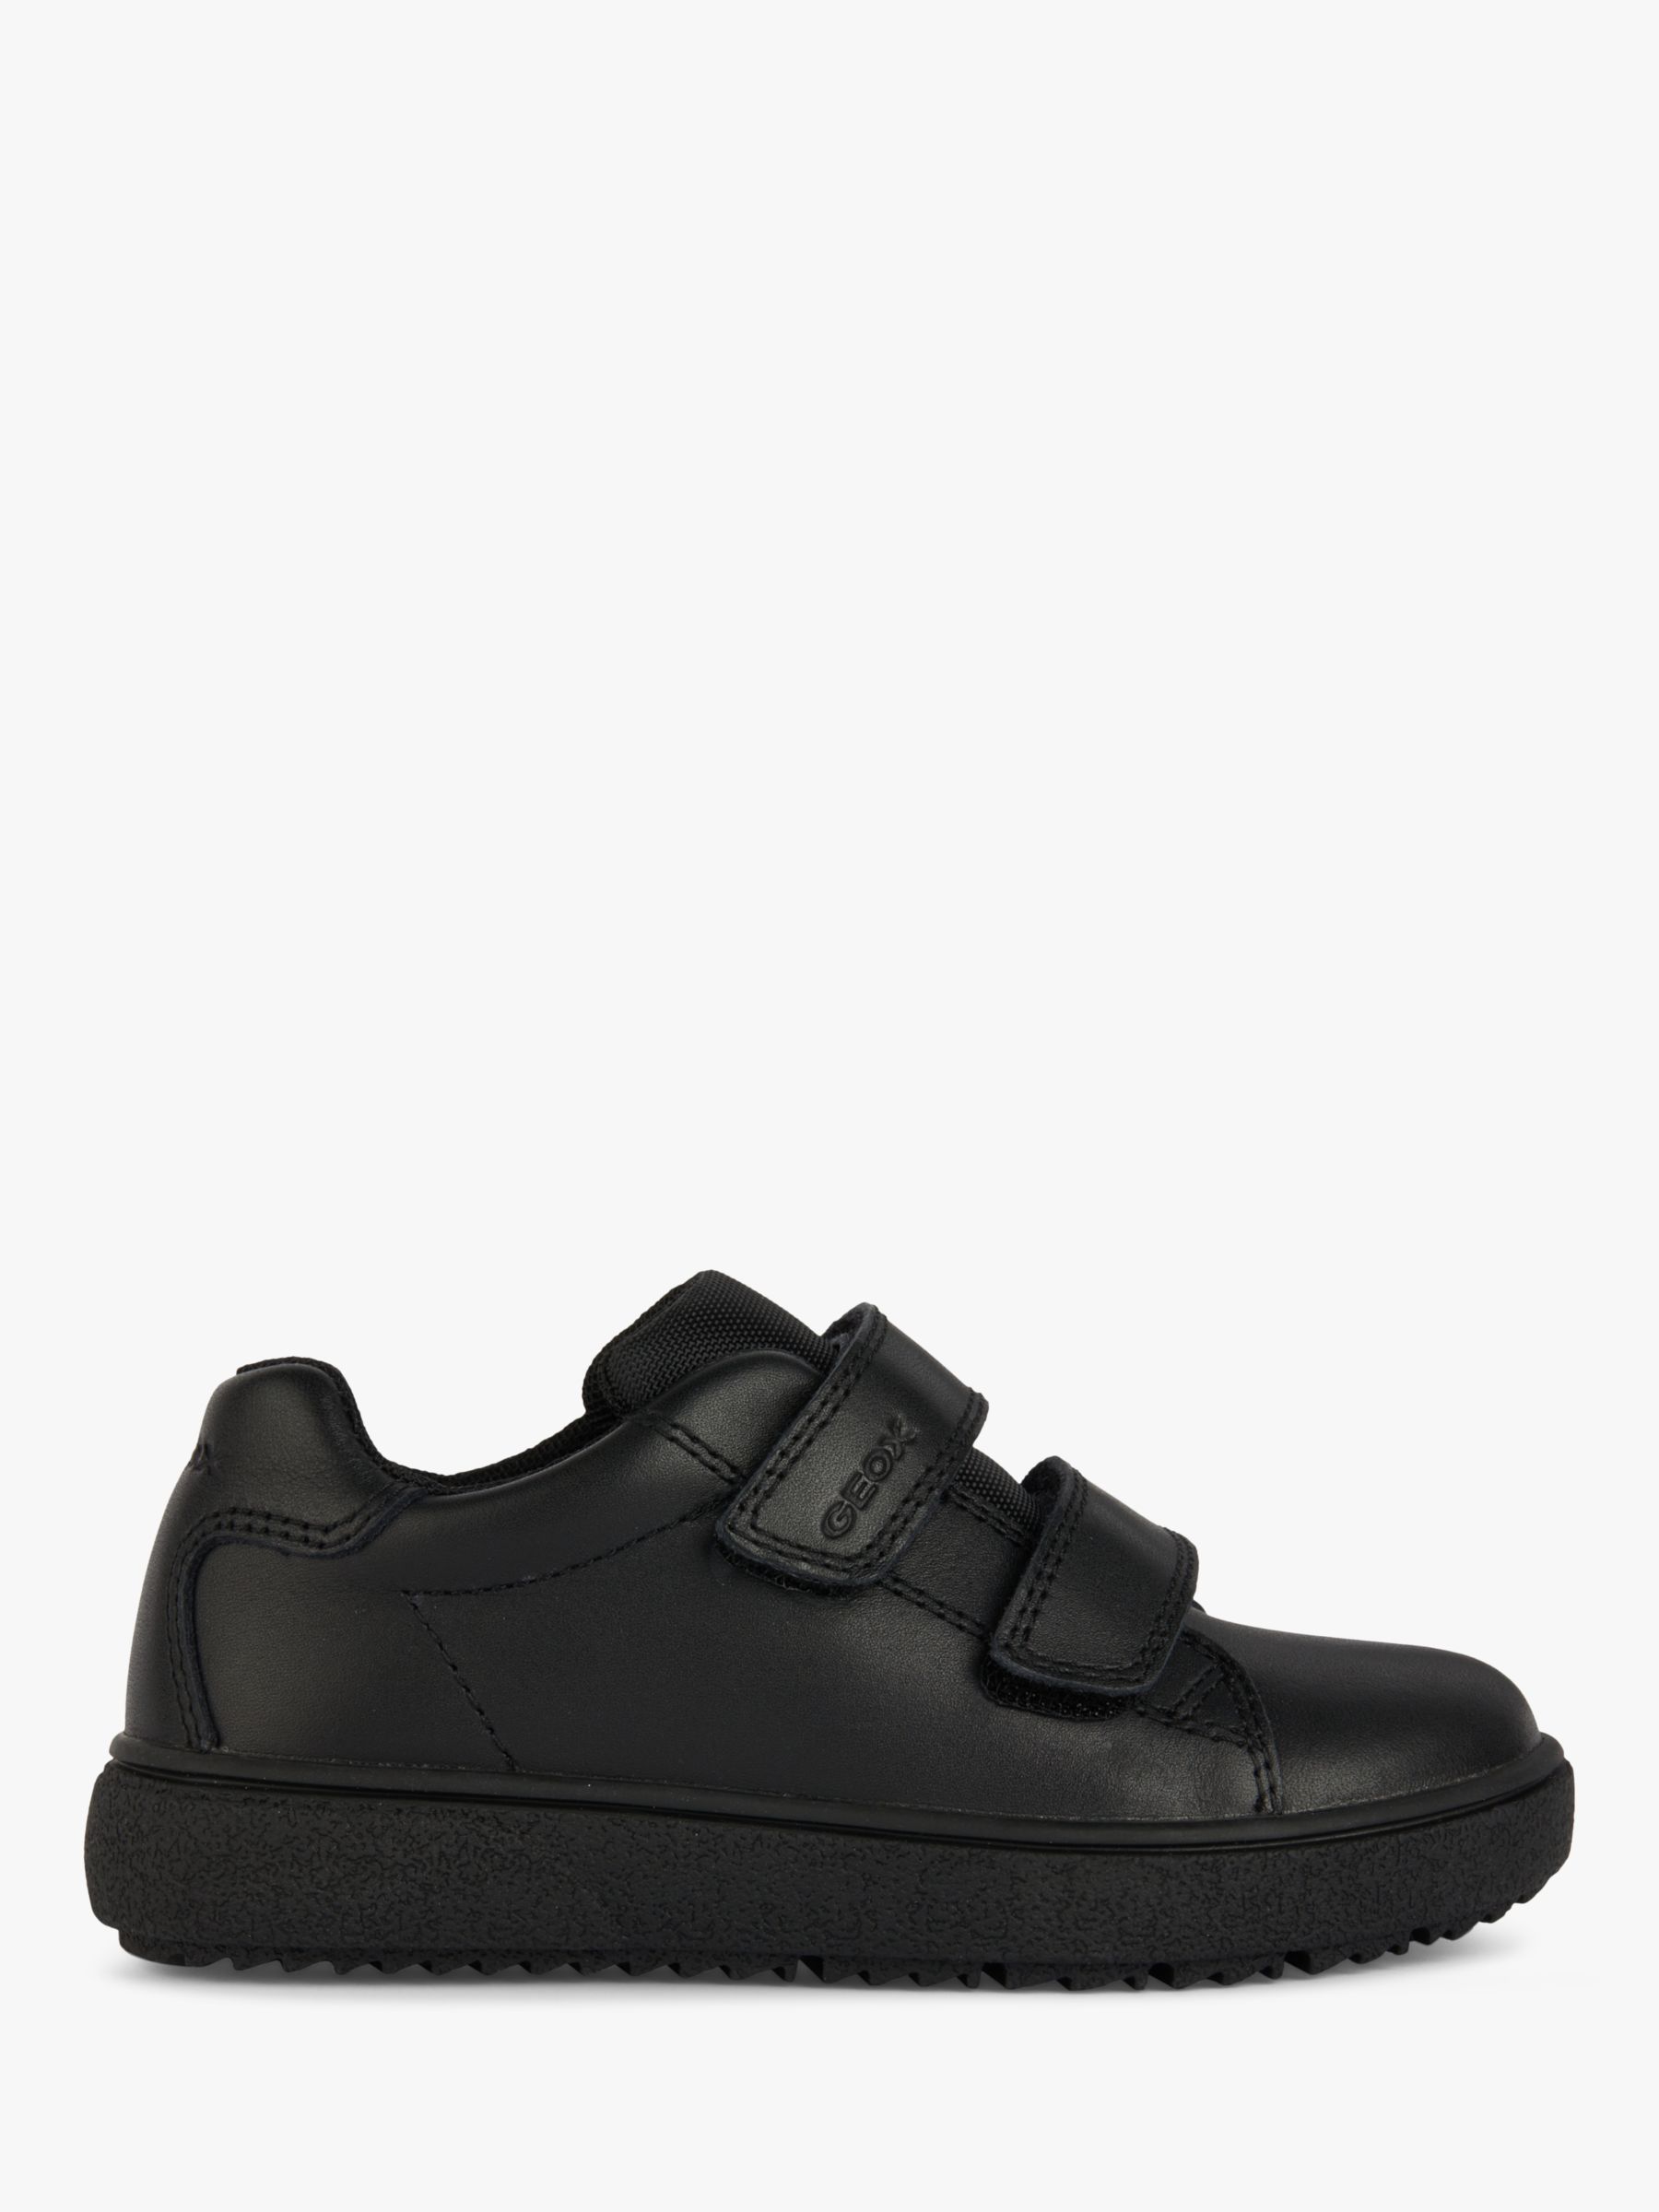 Geox Kids' Theleven Low Cut School Shoes at John Lewis & Partners